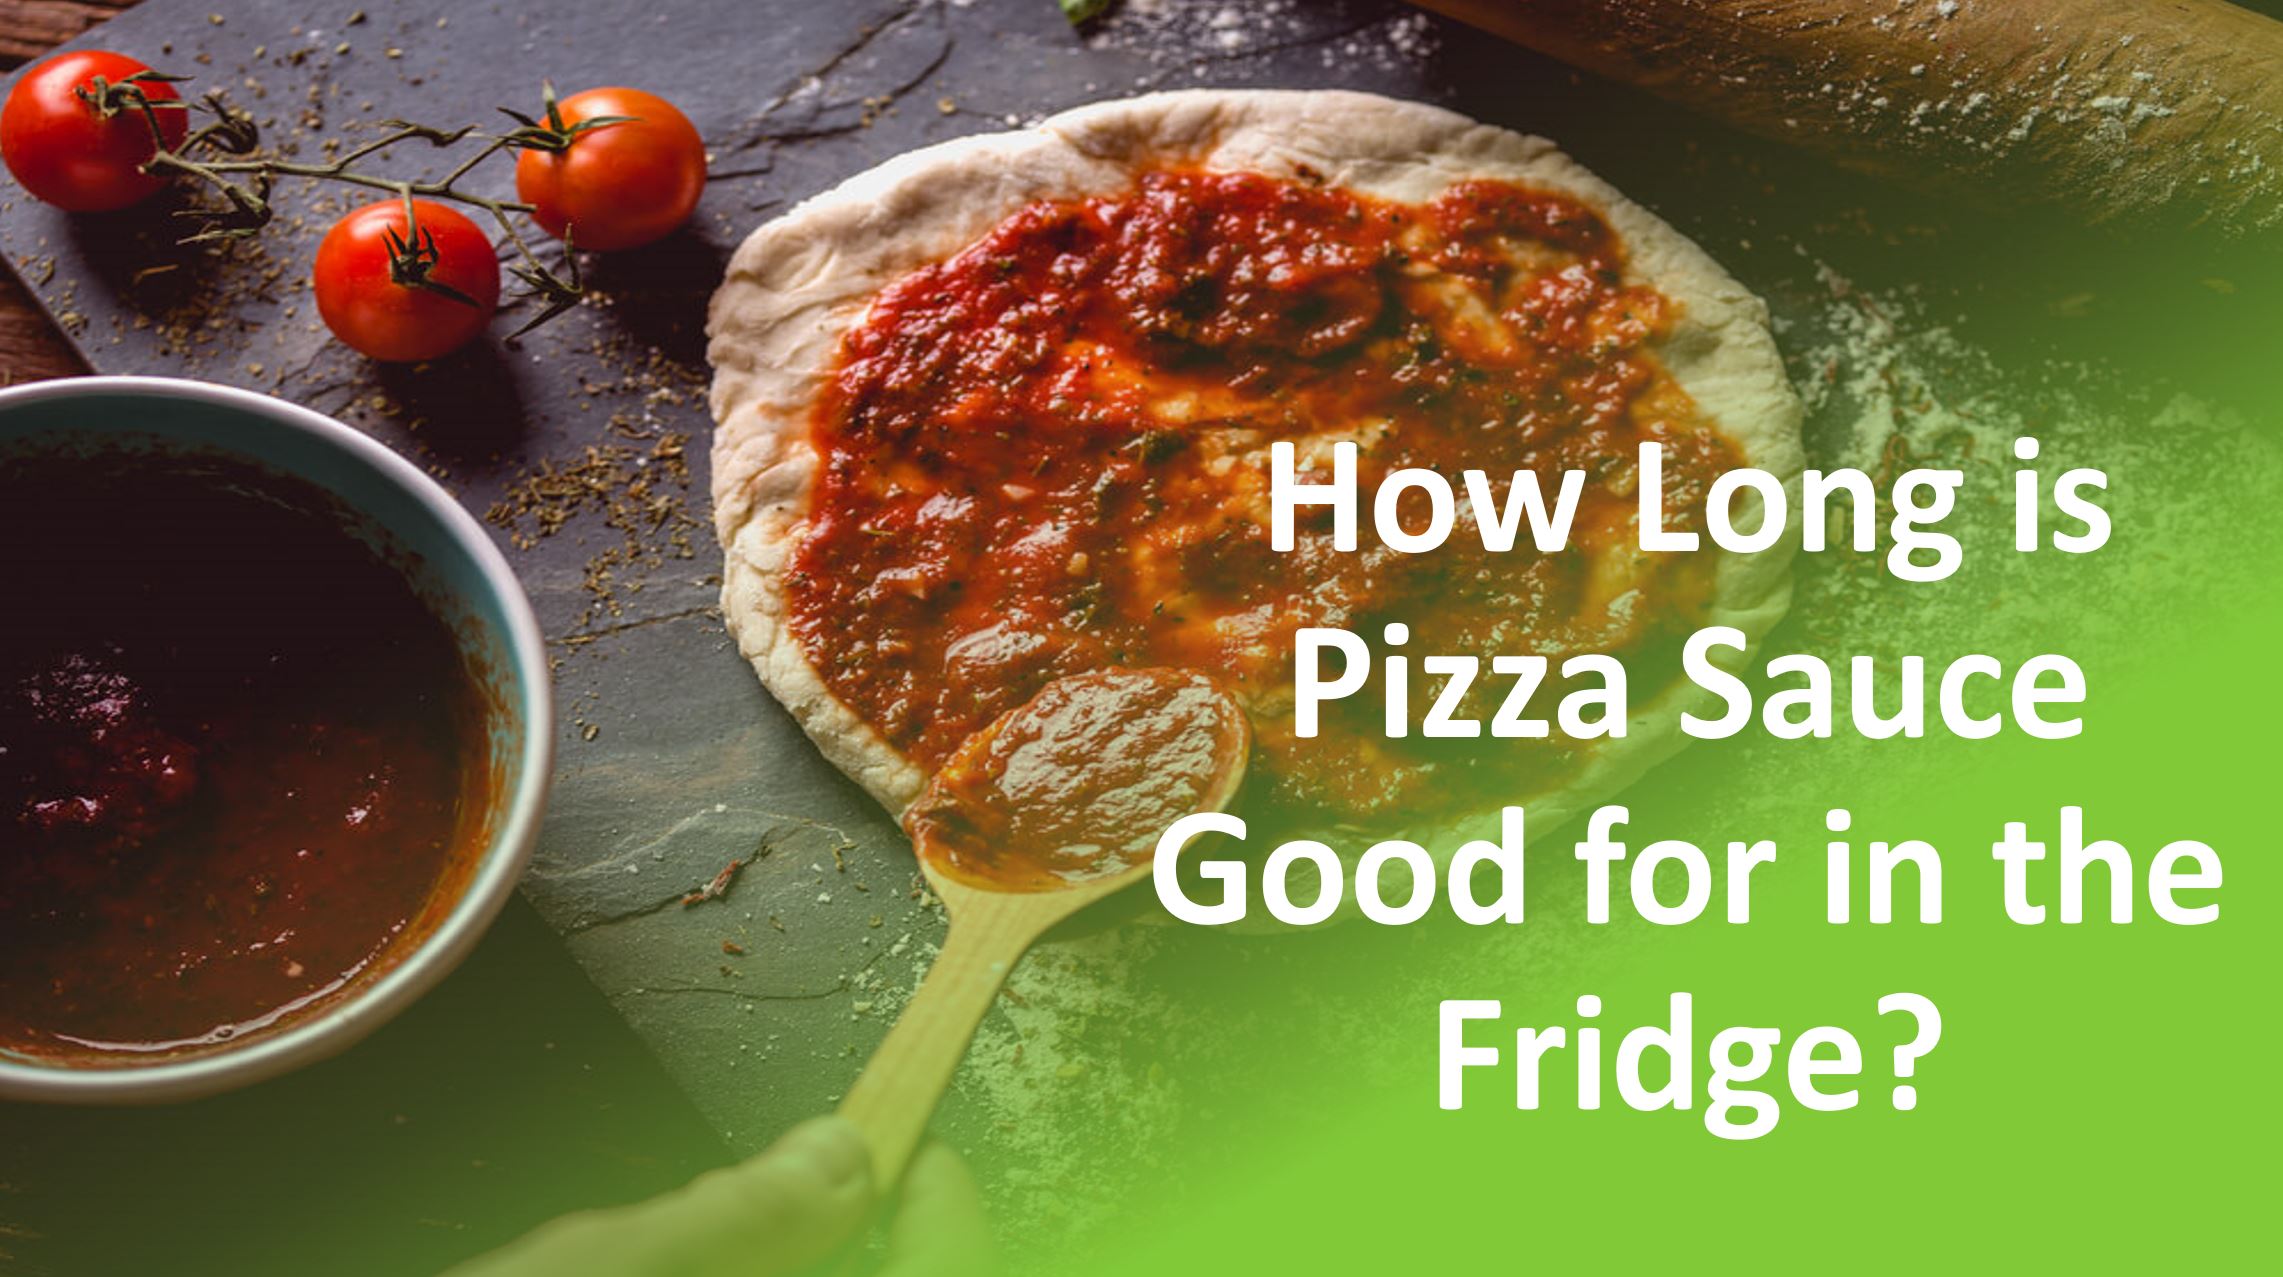 How Long Does Pizza Sauce Last in the Fridge? - Food Champs